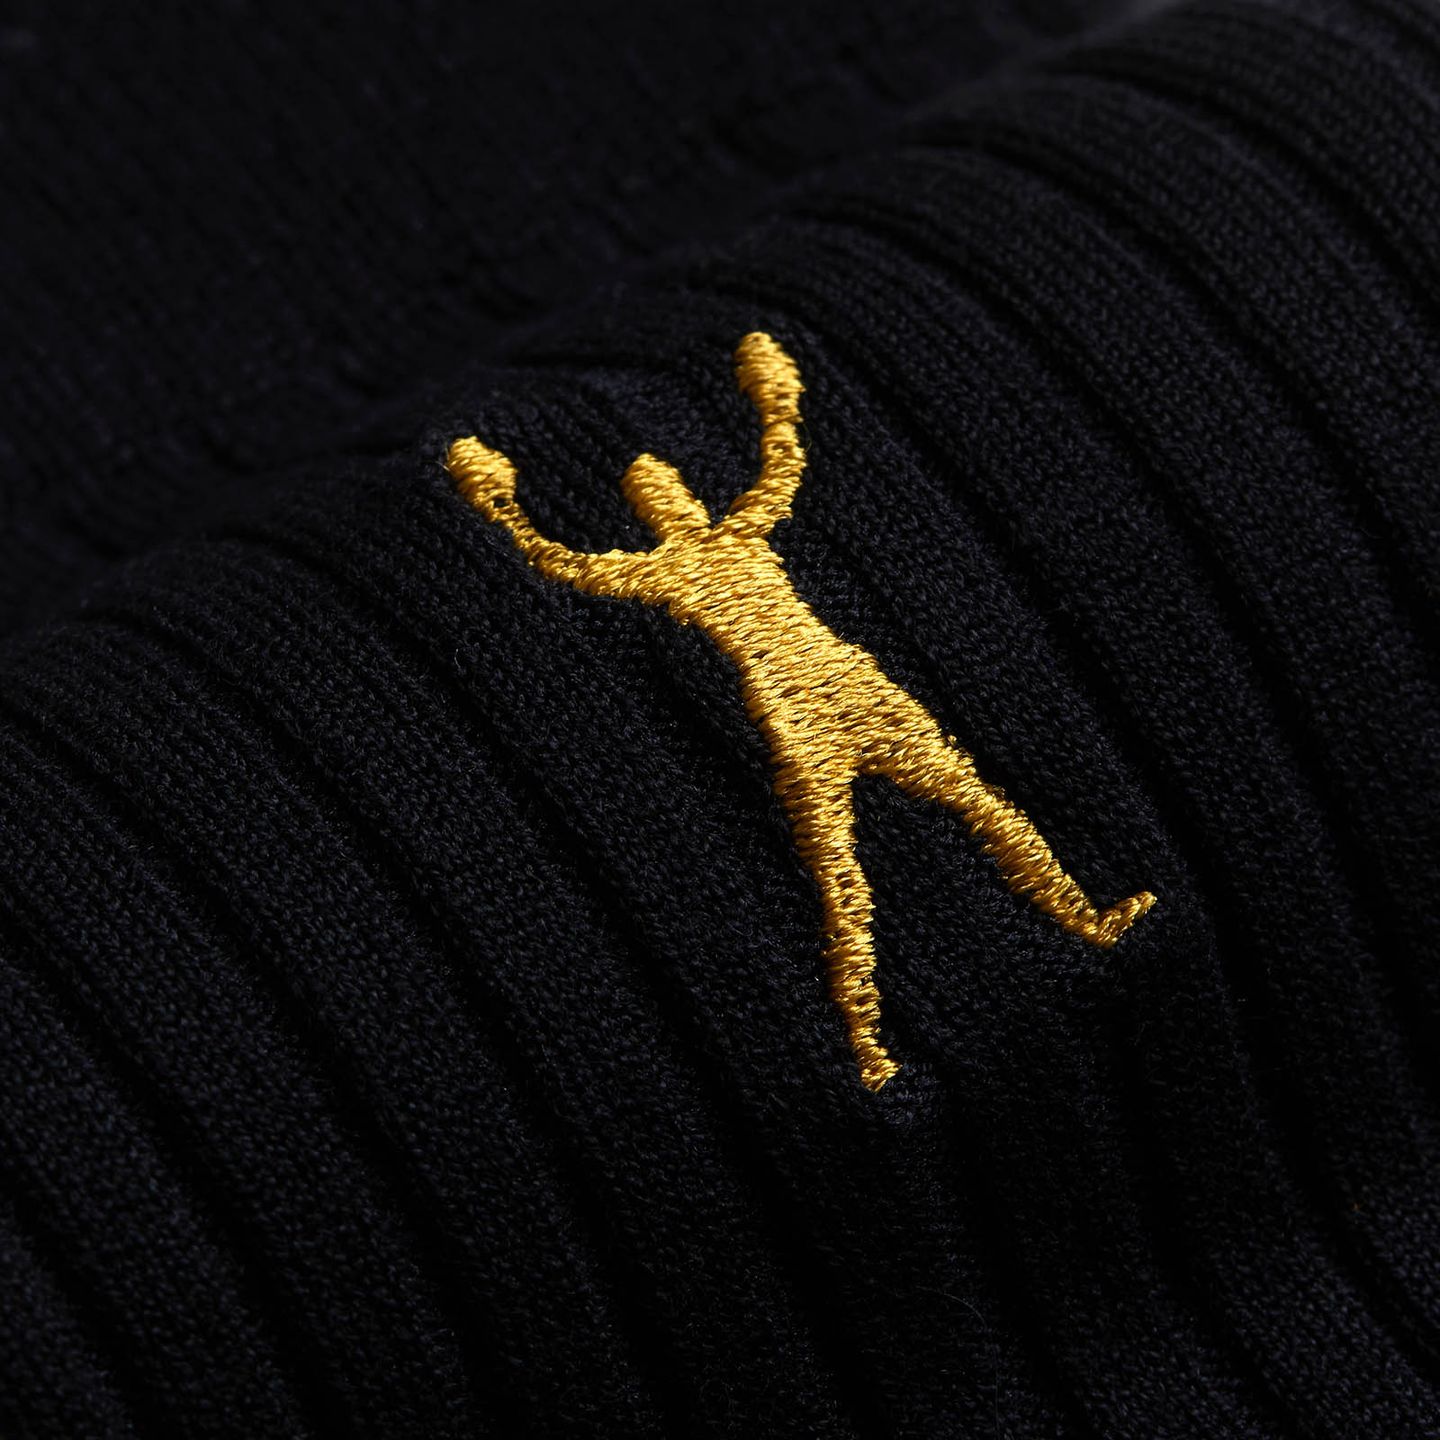 A close up of a yellow character on a black sock